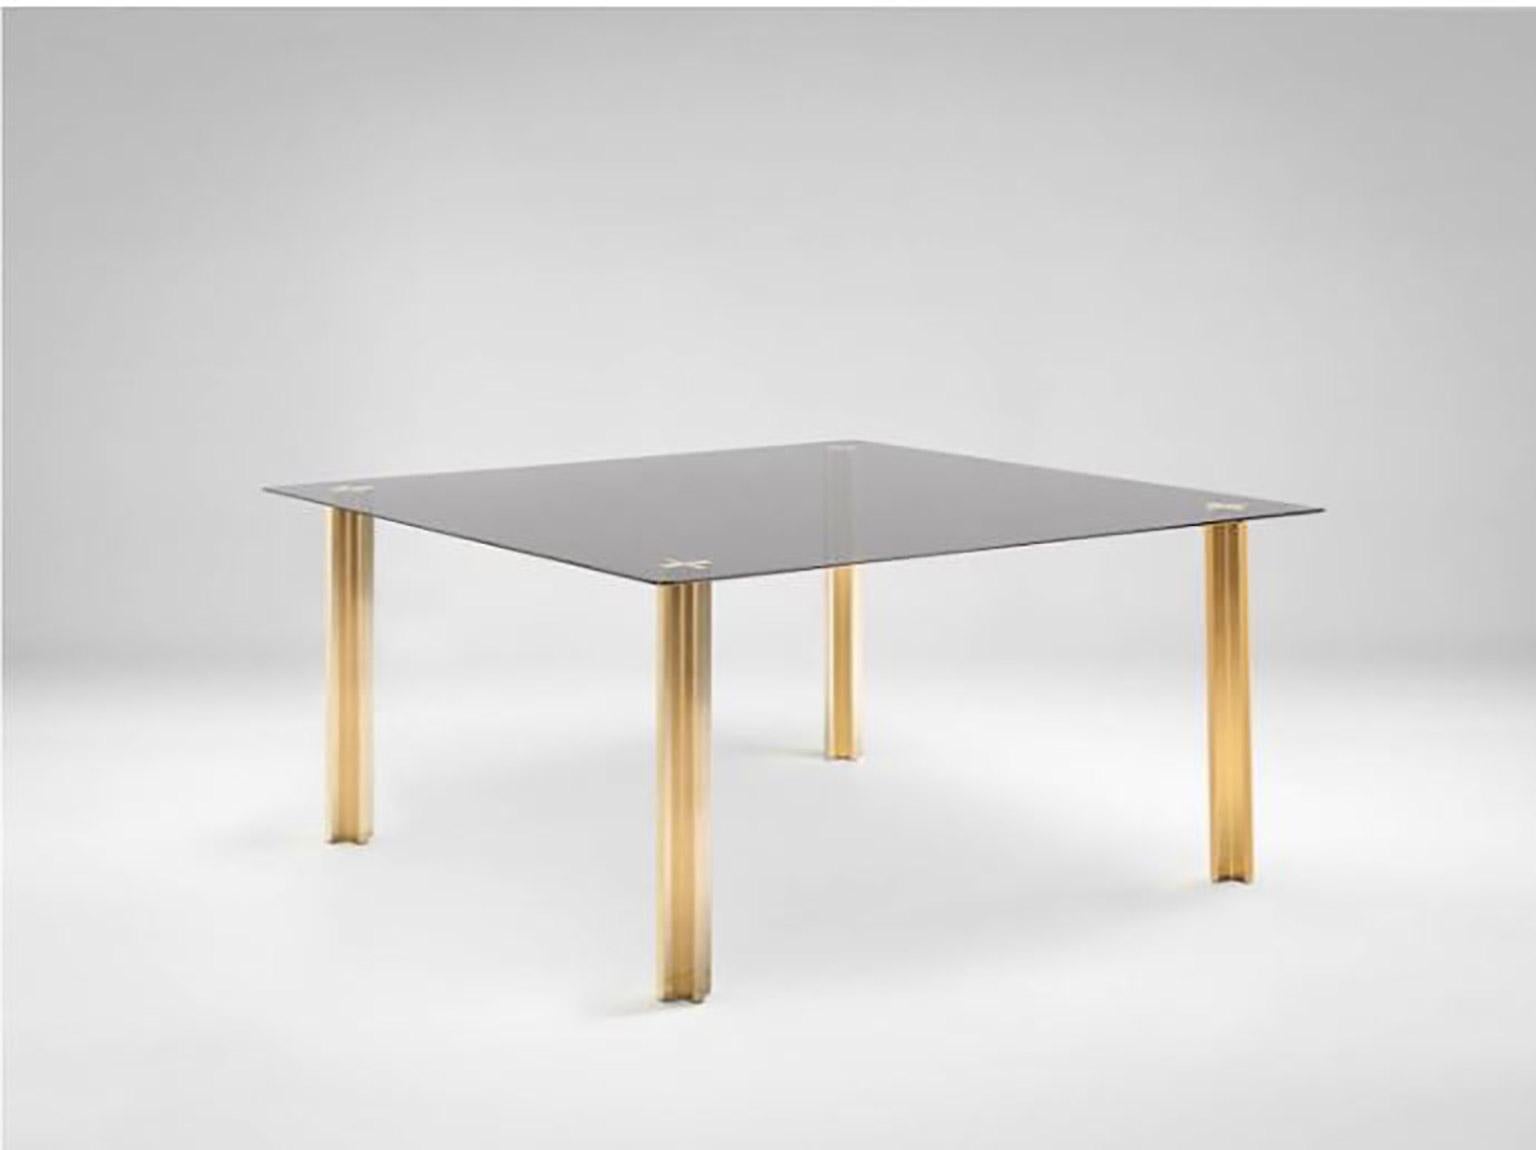 SEM Gold collection, square table with glass top: extra light transparent glass or smoke grey transparent glass (12 mm thick). Plated aluminium legs finished in 24-karat polished or fine brushed yellow gold. The Gold collection has a range of